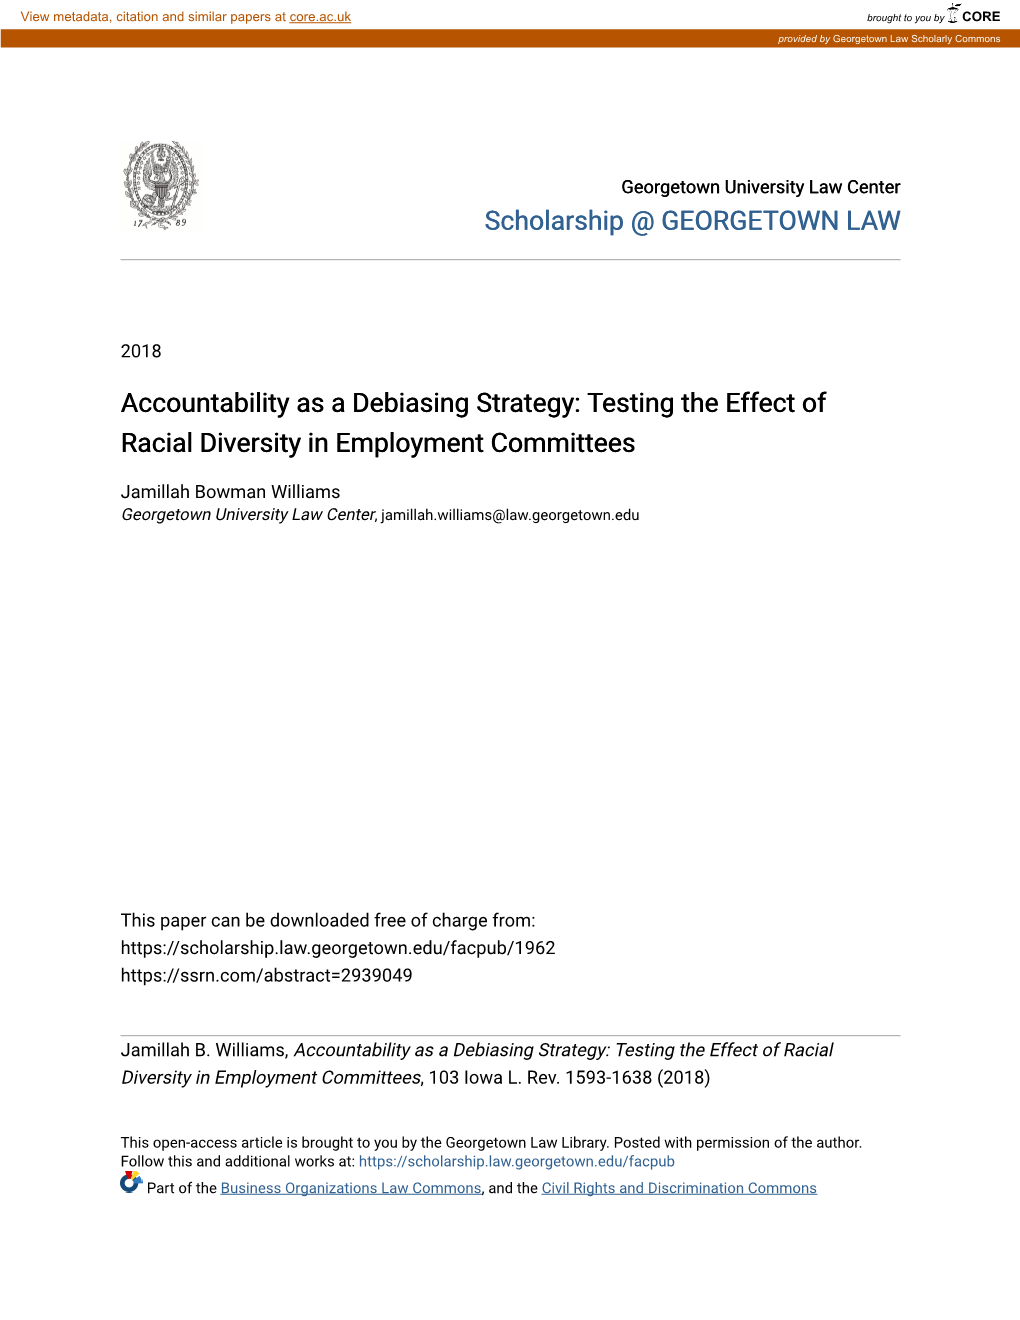 Accountability As a Debiasing Strategy: Testing the Effect of Racial Diversity in Employment Committees